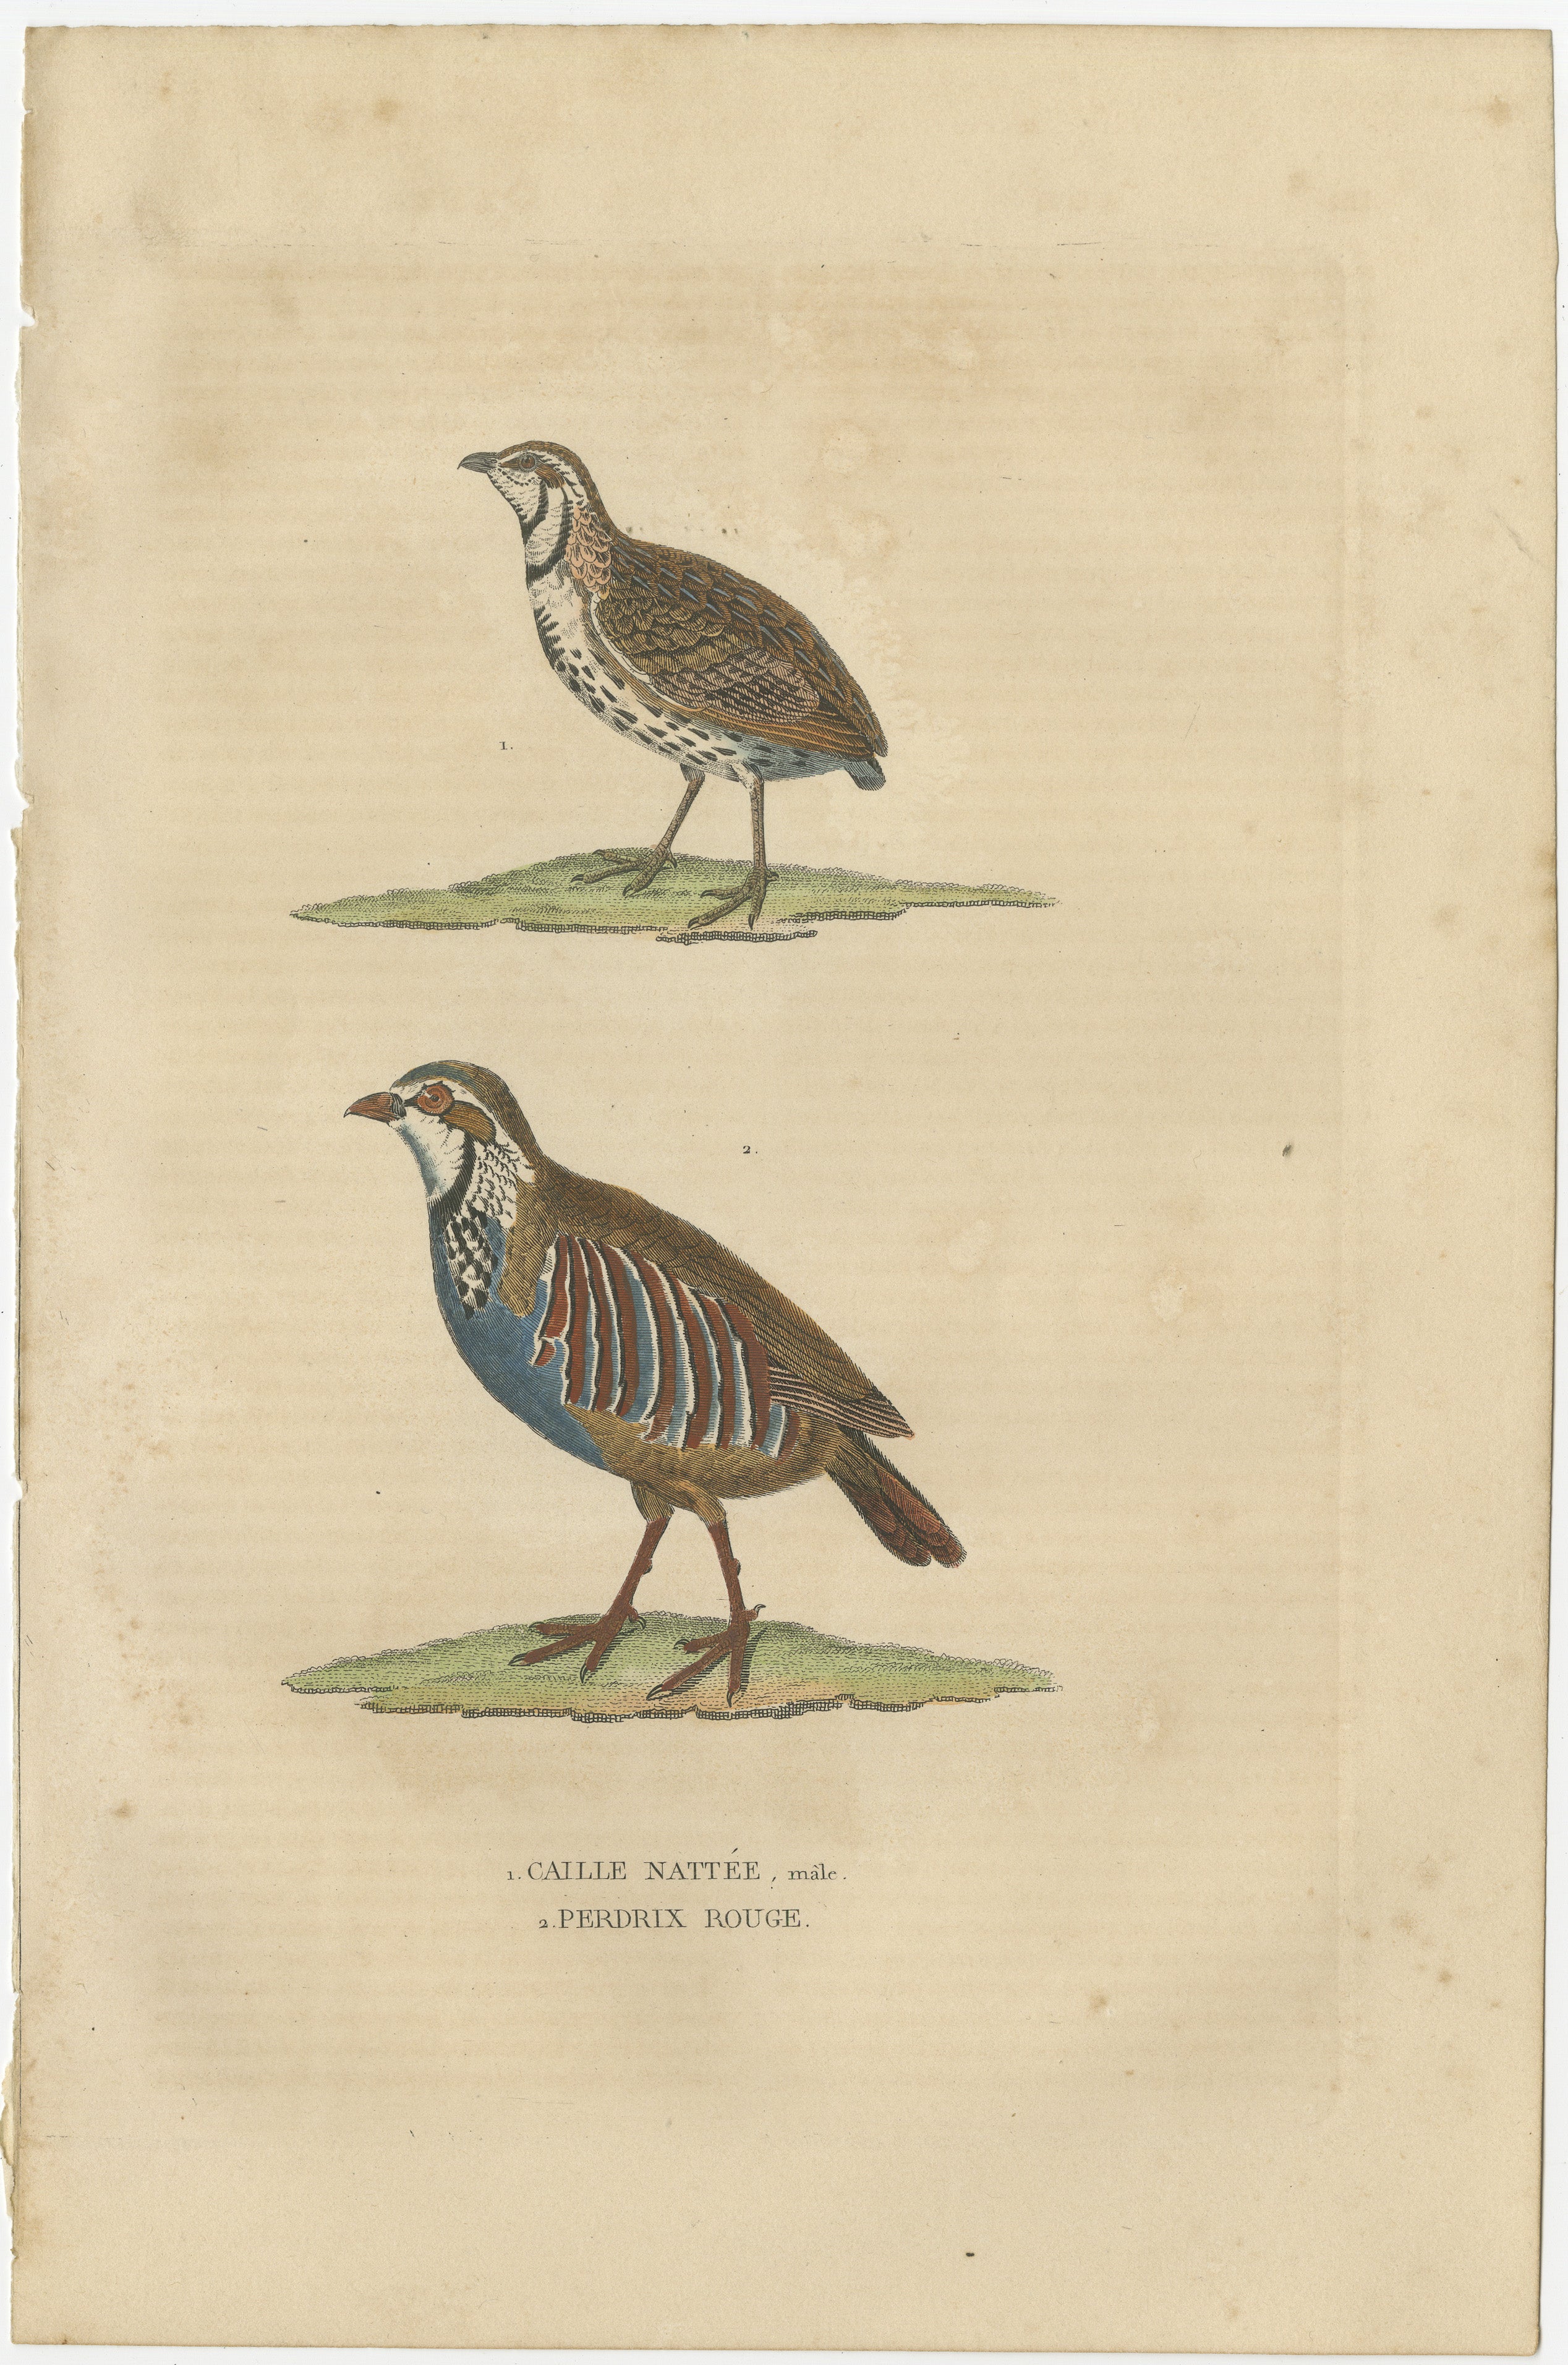 1. CAILLE NATTEE (MALE), 2. PERDRIX ROUGE.

The male Quail, a modestly sized ground-dwelling bird, features intricate speckled plumage, often showcasing warm earthy tones that blend seamlessly with its habitat. Its unassuming appearance belies its